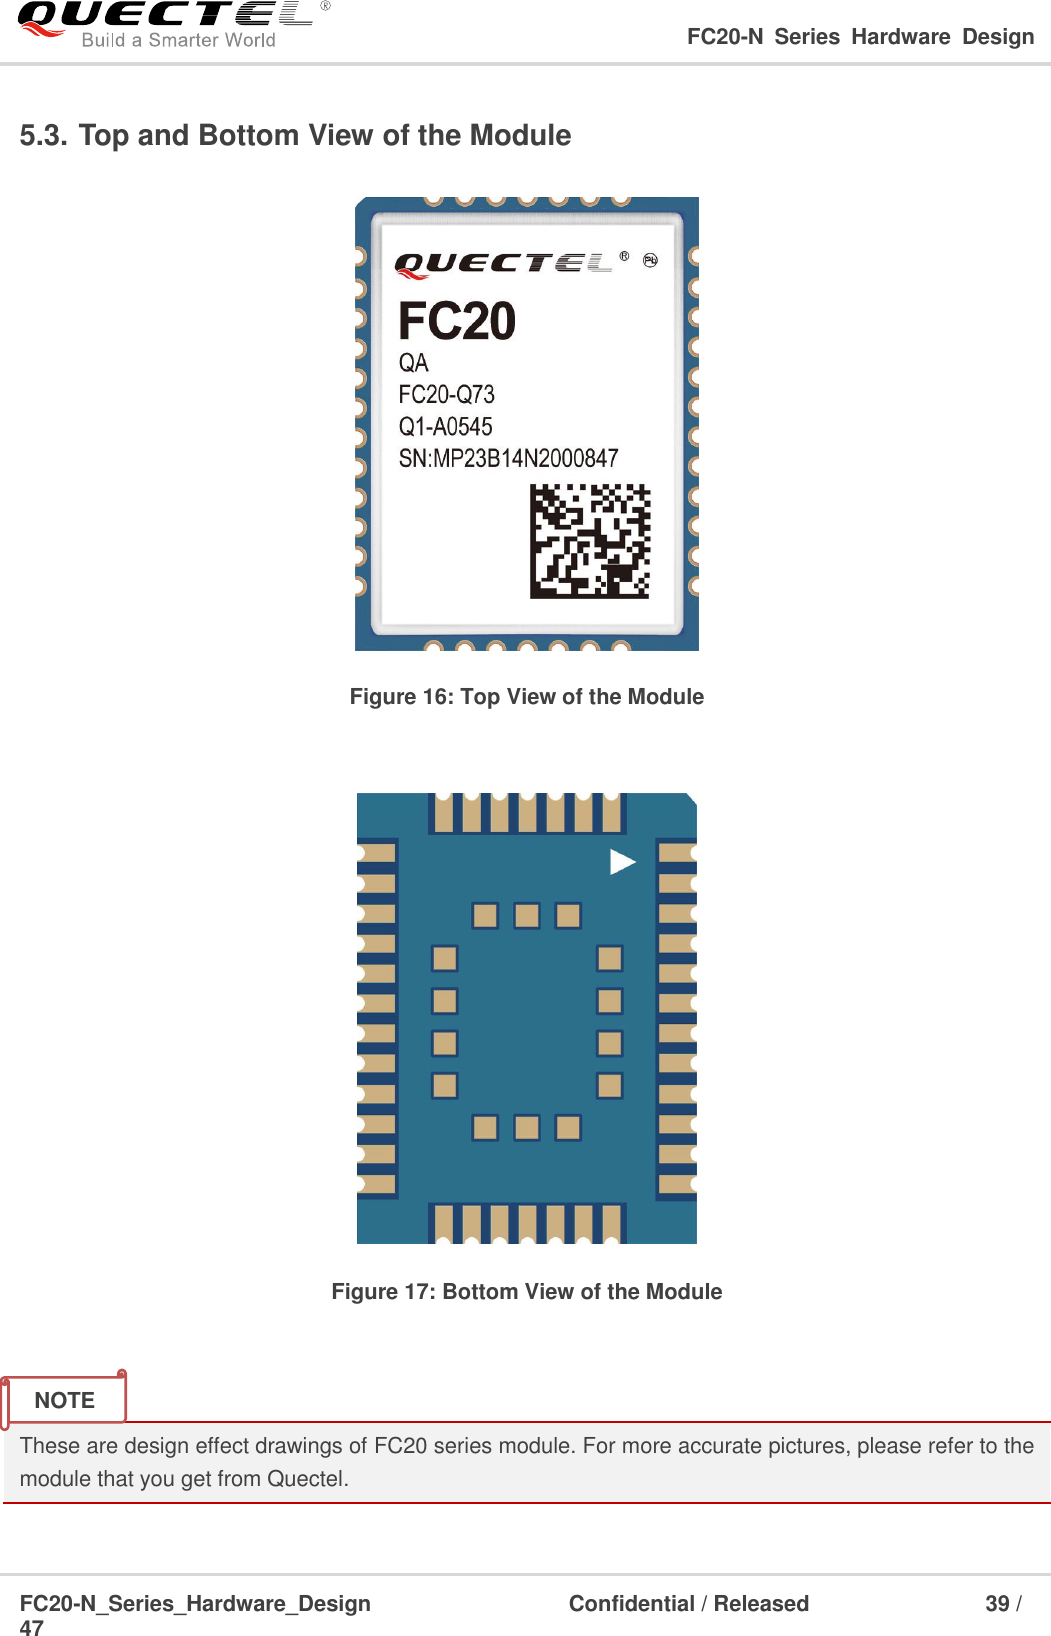                                                                                                                                     FC20-N  Series  Hardware  Design  FC20-N_Series_Hardware_Design                                Confidential / Released                    39 / 47    5.3. Top and Bottom View of the Module  Figure 16: Top View of the Module   Figure 17: Bottom View of the Module   These are design effect drawings of FC20 series module. For more accurate pictures, please refer to the module that you get from Quectel.    NOTE 